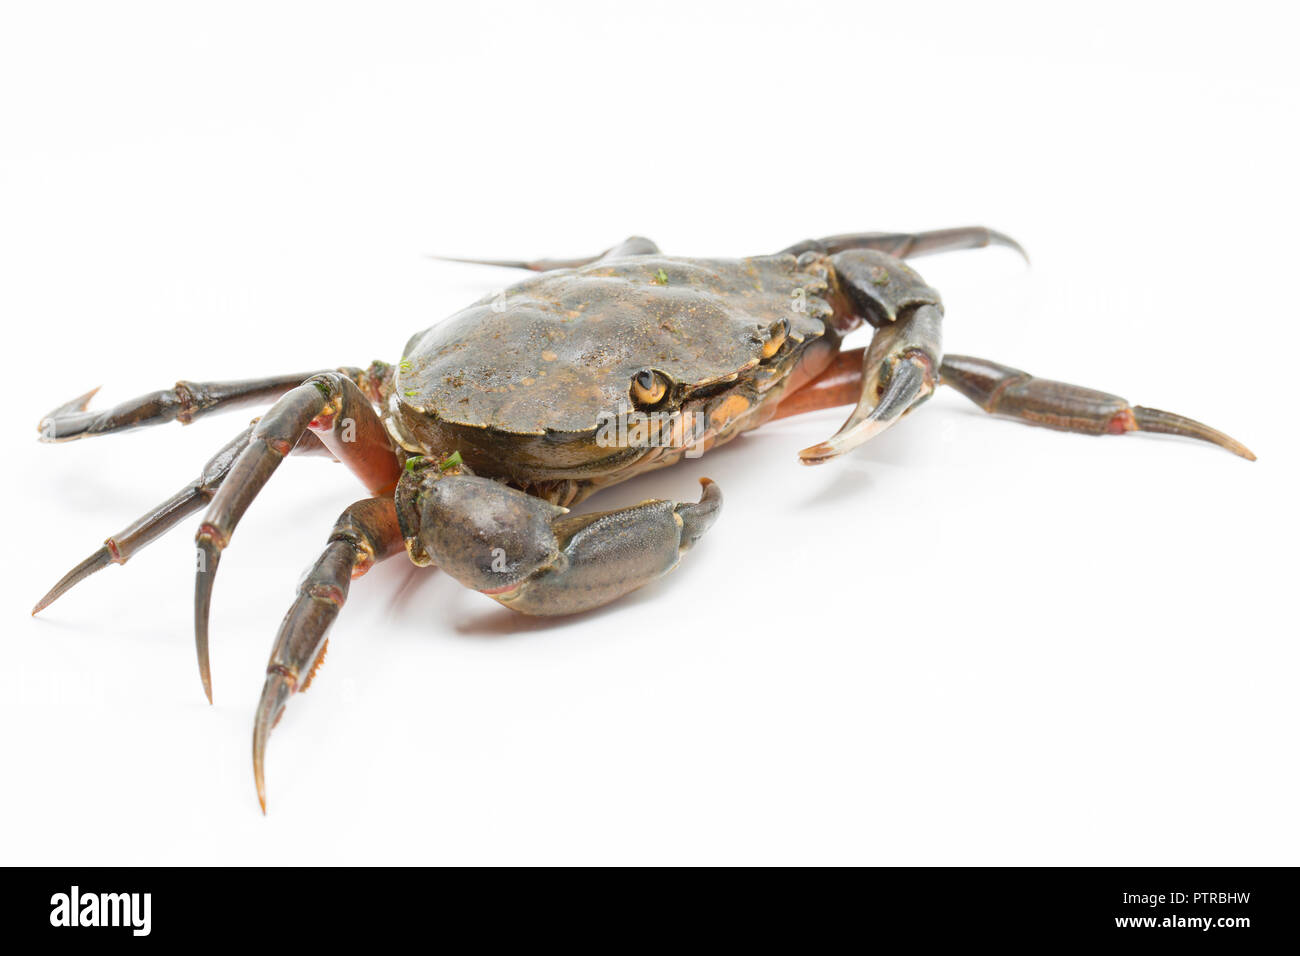 A shore crab, Carcinus maenas, also known as the european crab or green crab, photographed on a white background before release. Dorset England Stock Photo